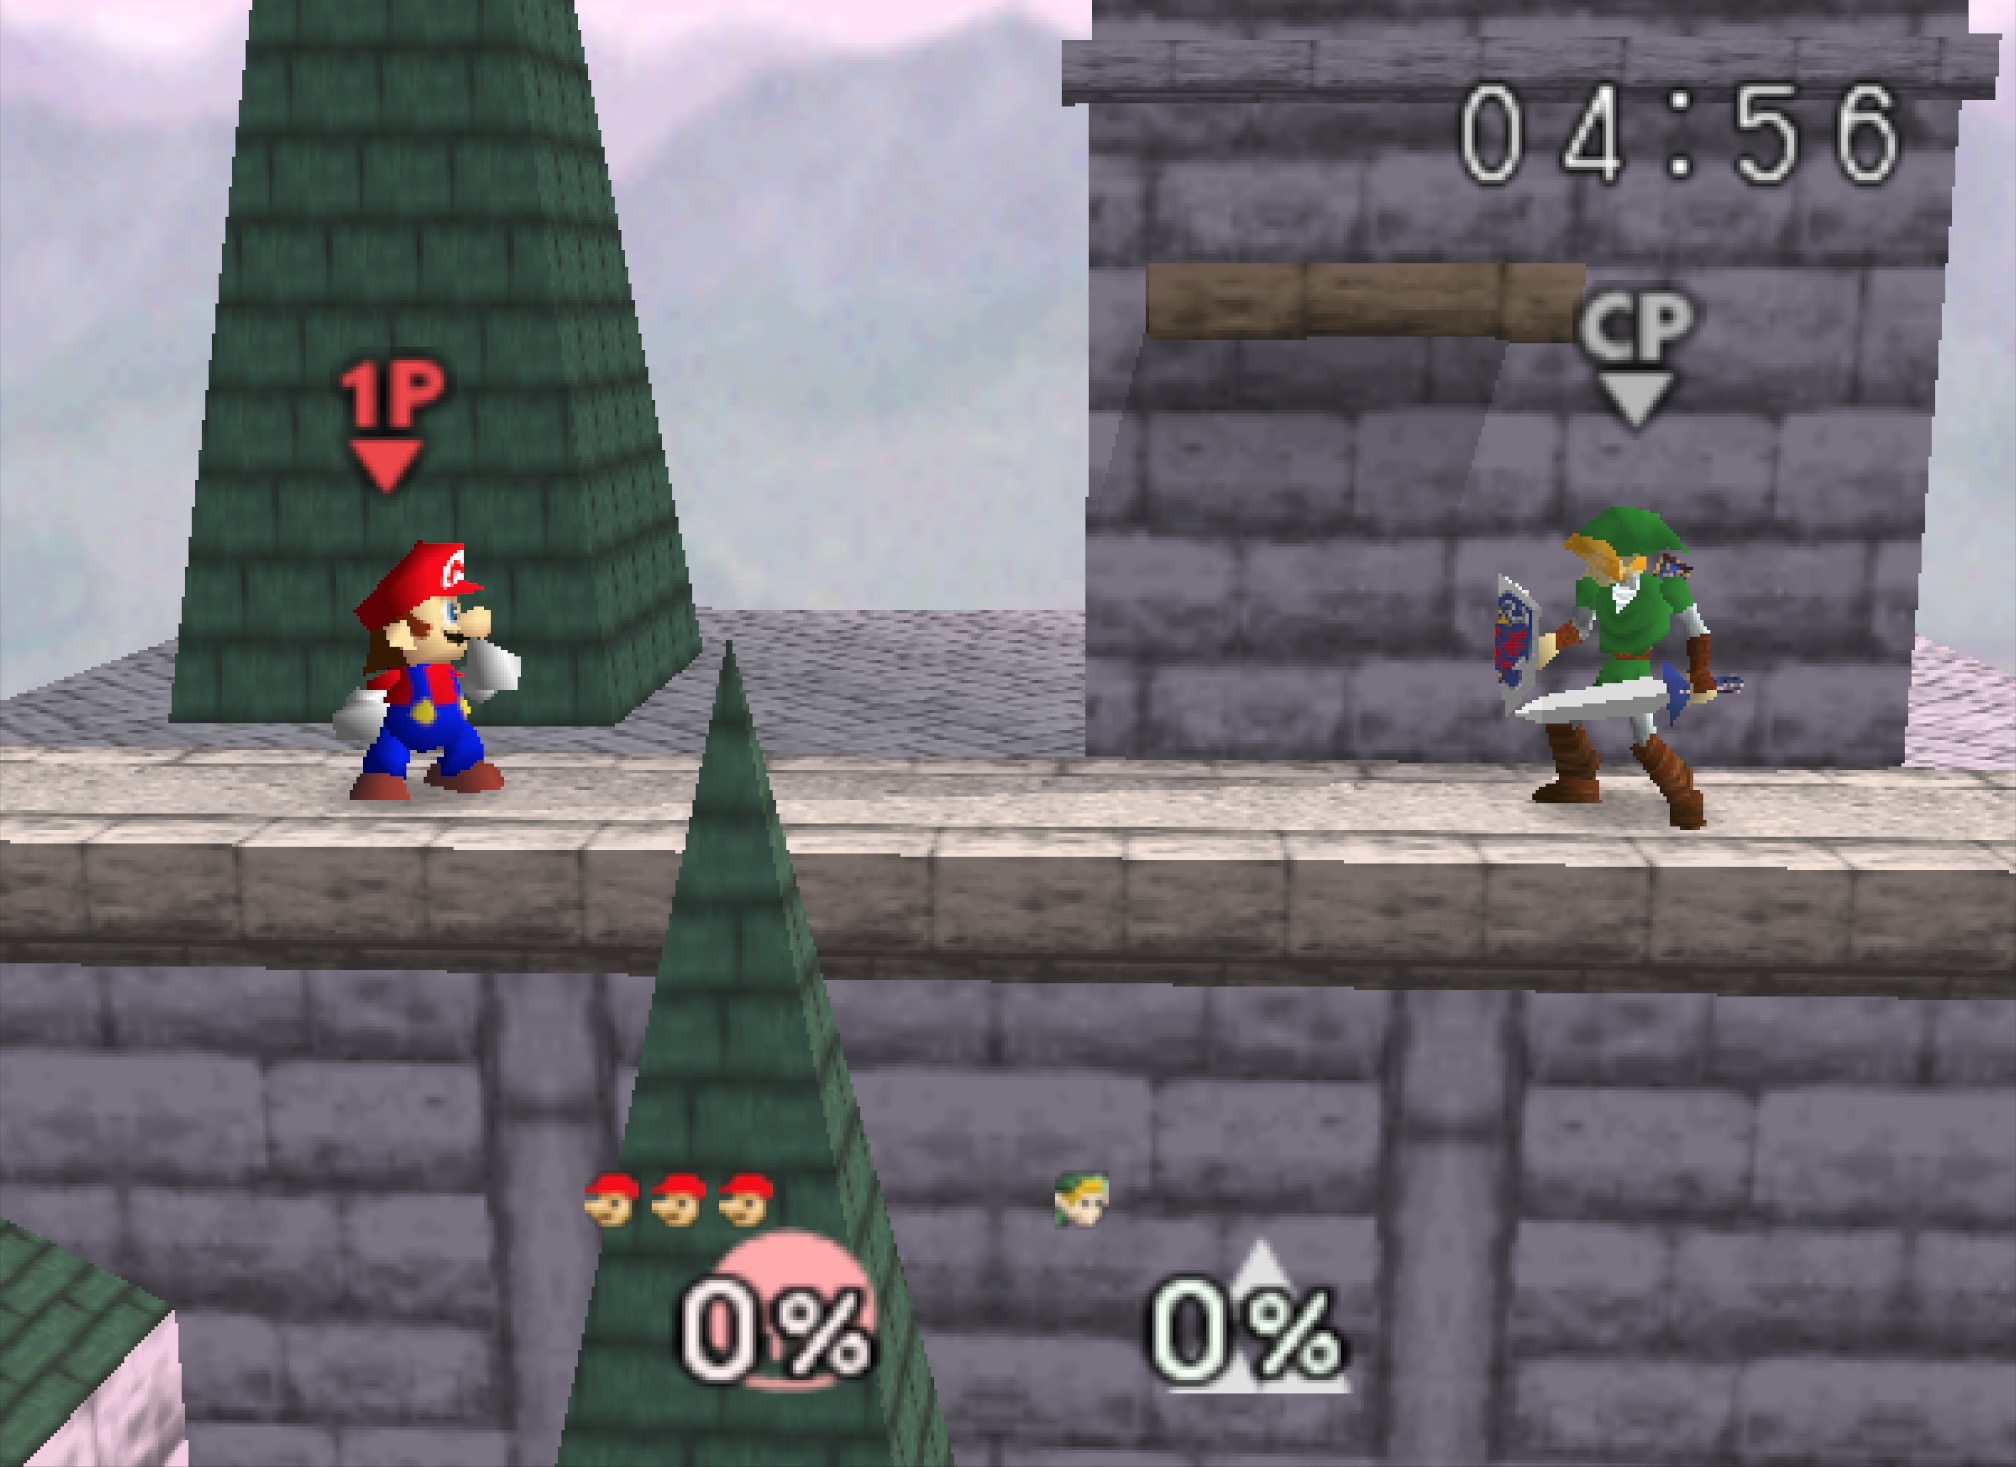 The 100 Best Nintendo 64 Games, According To Over 250,000 Players